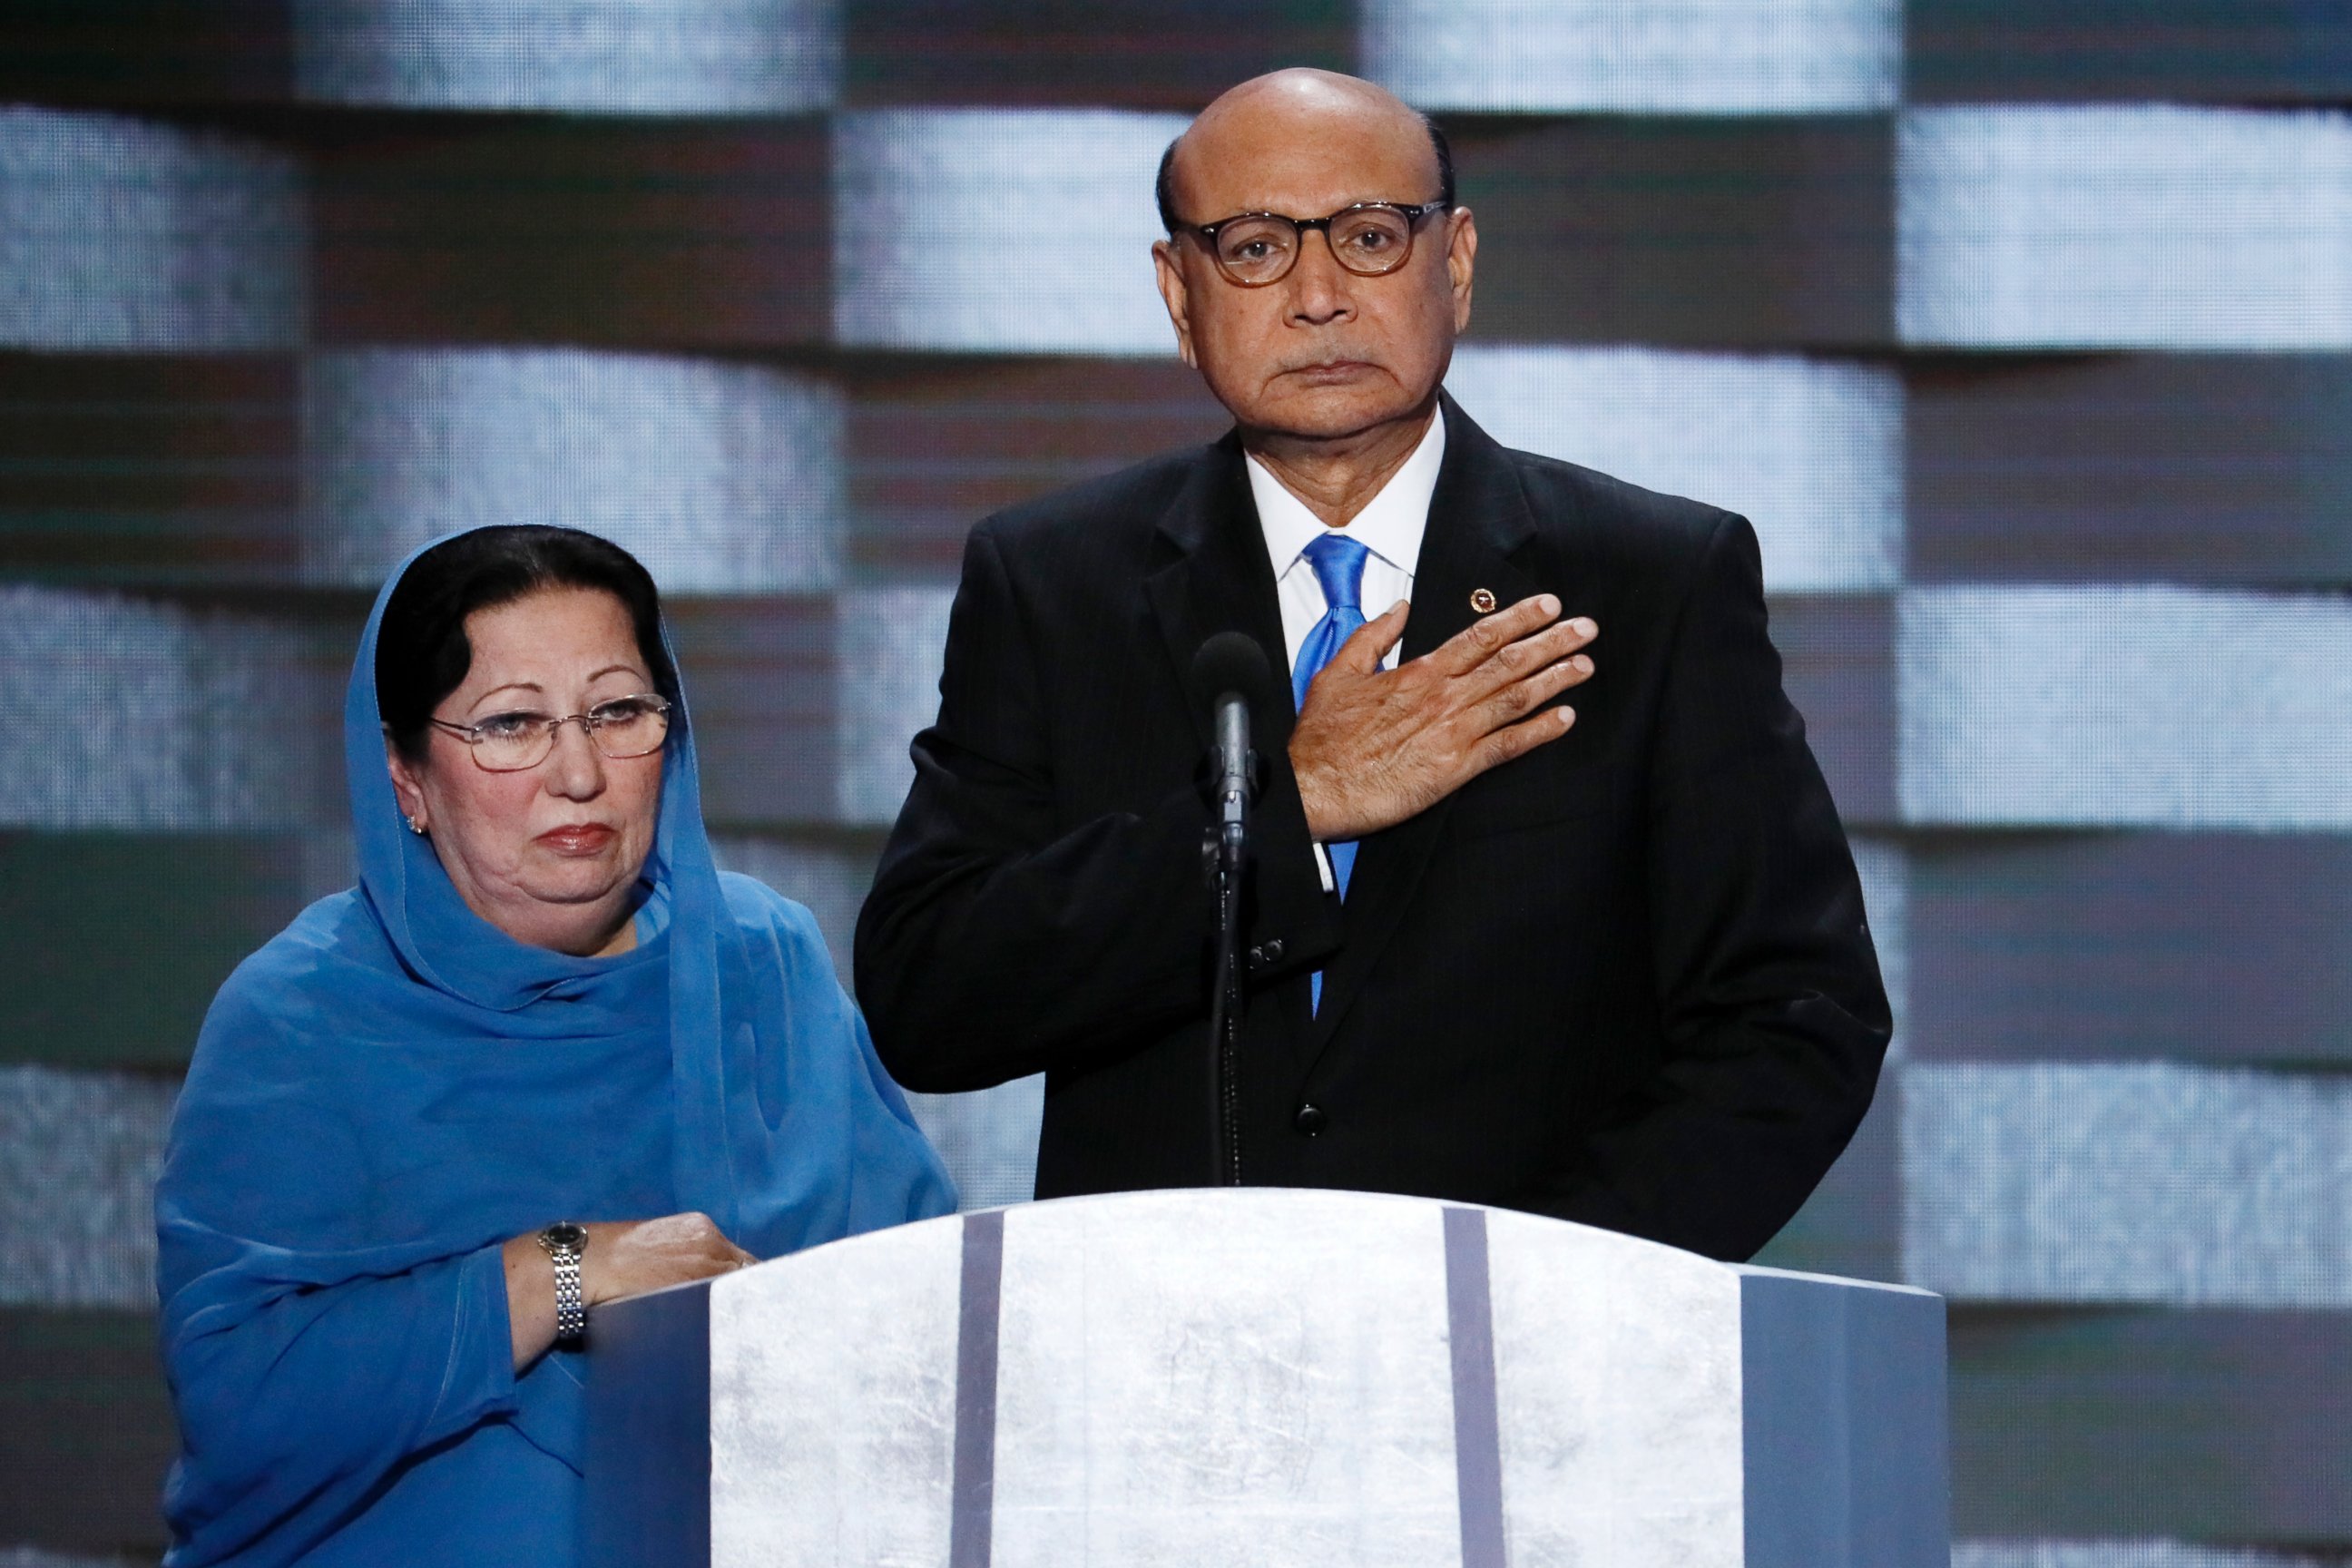 PHOTO: Khizr Khan, father of fallen US Army Capt. Humayun S. M. Khan, and his wife Ghazala speak during the final day of the Democratic National Convention in Philadelphia, July 28, 2016. 